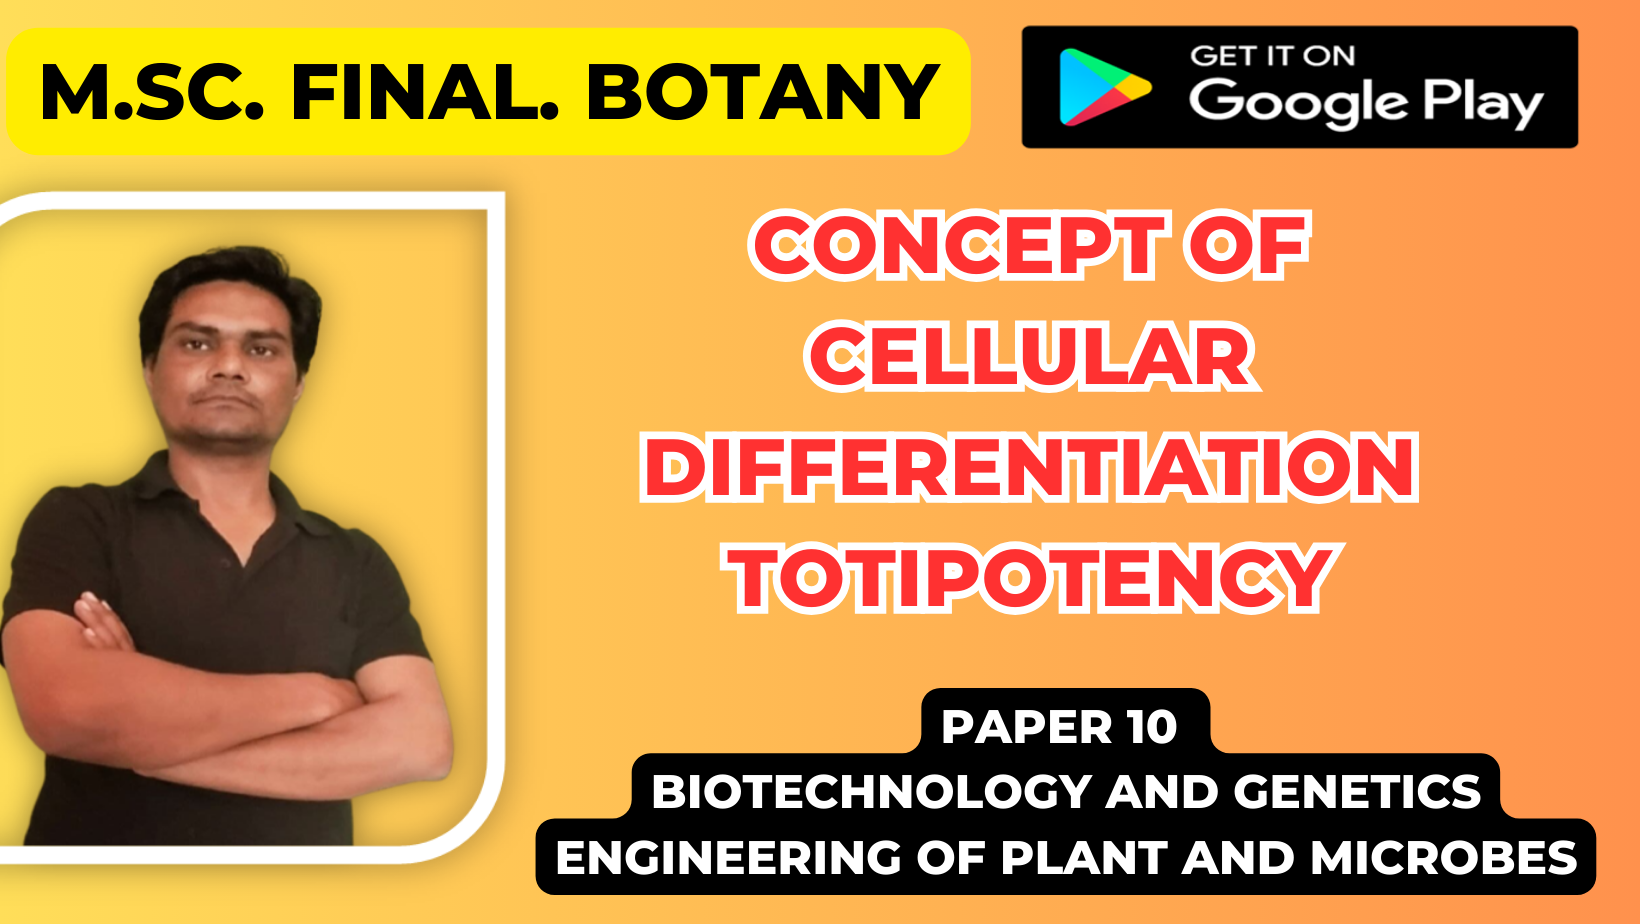 You are currently viewing Concept of Cellular differentiation totipotency